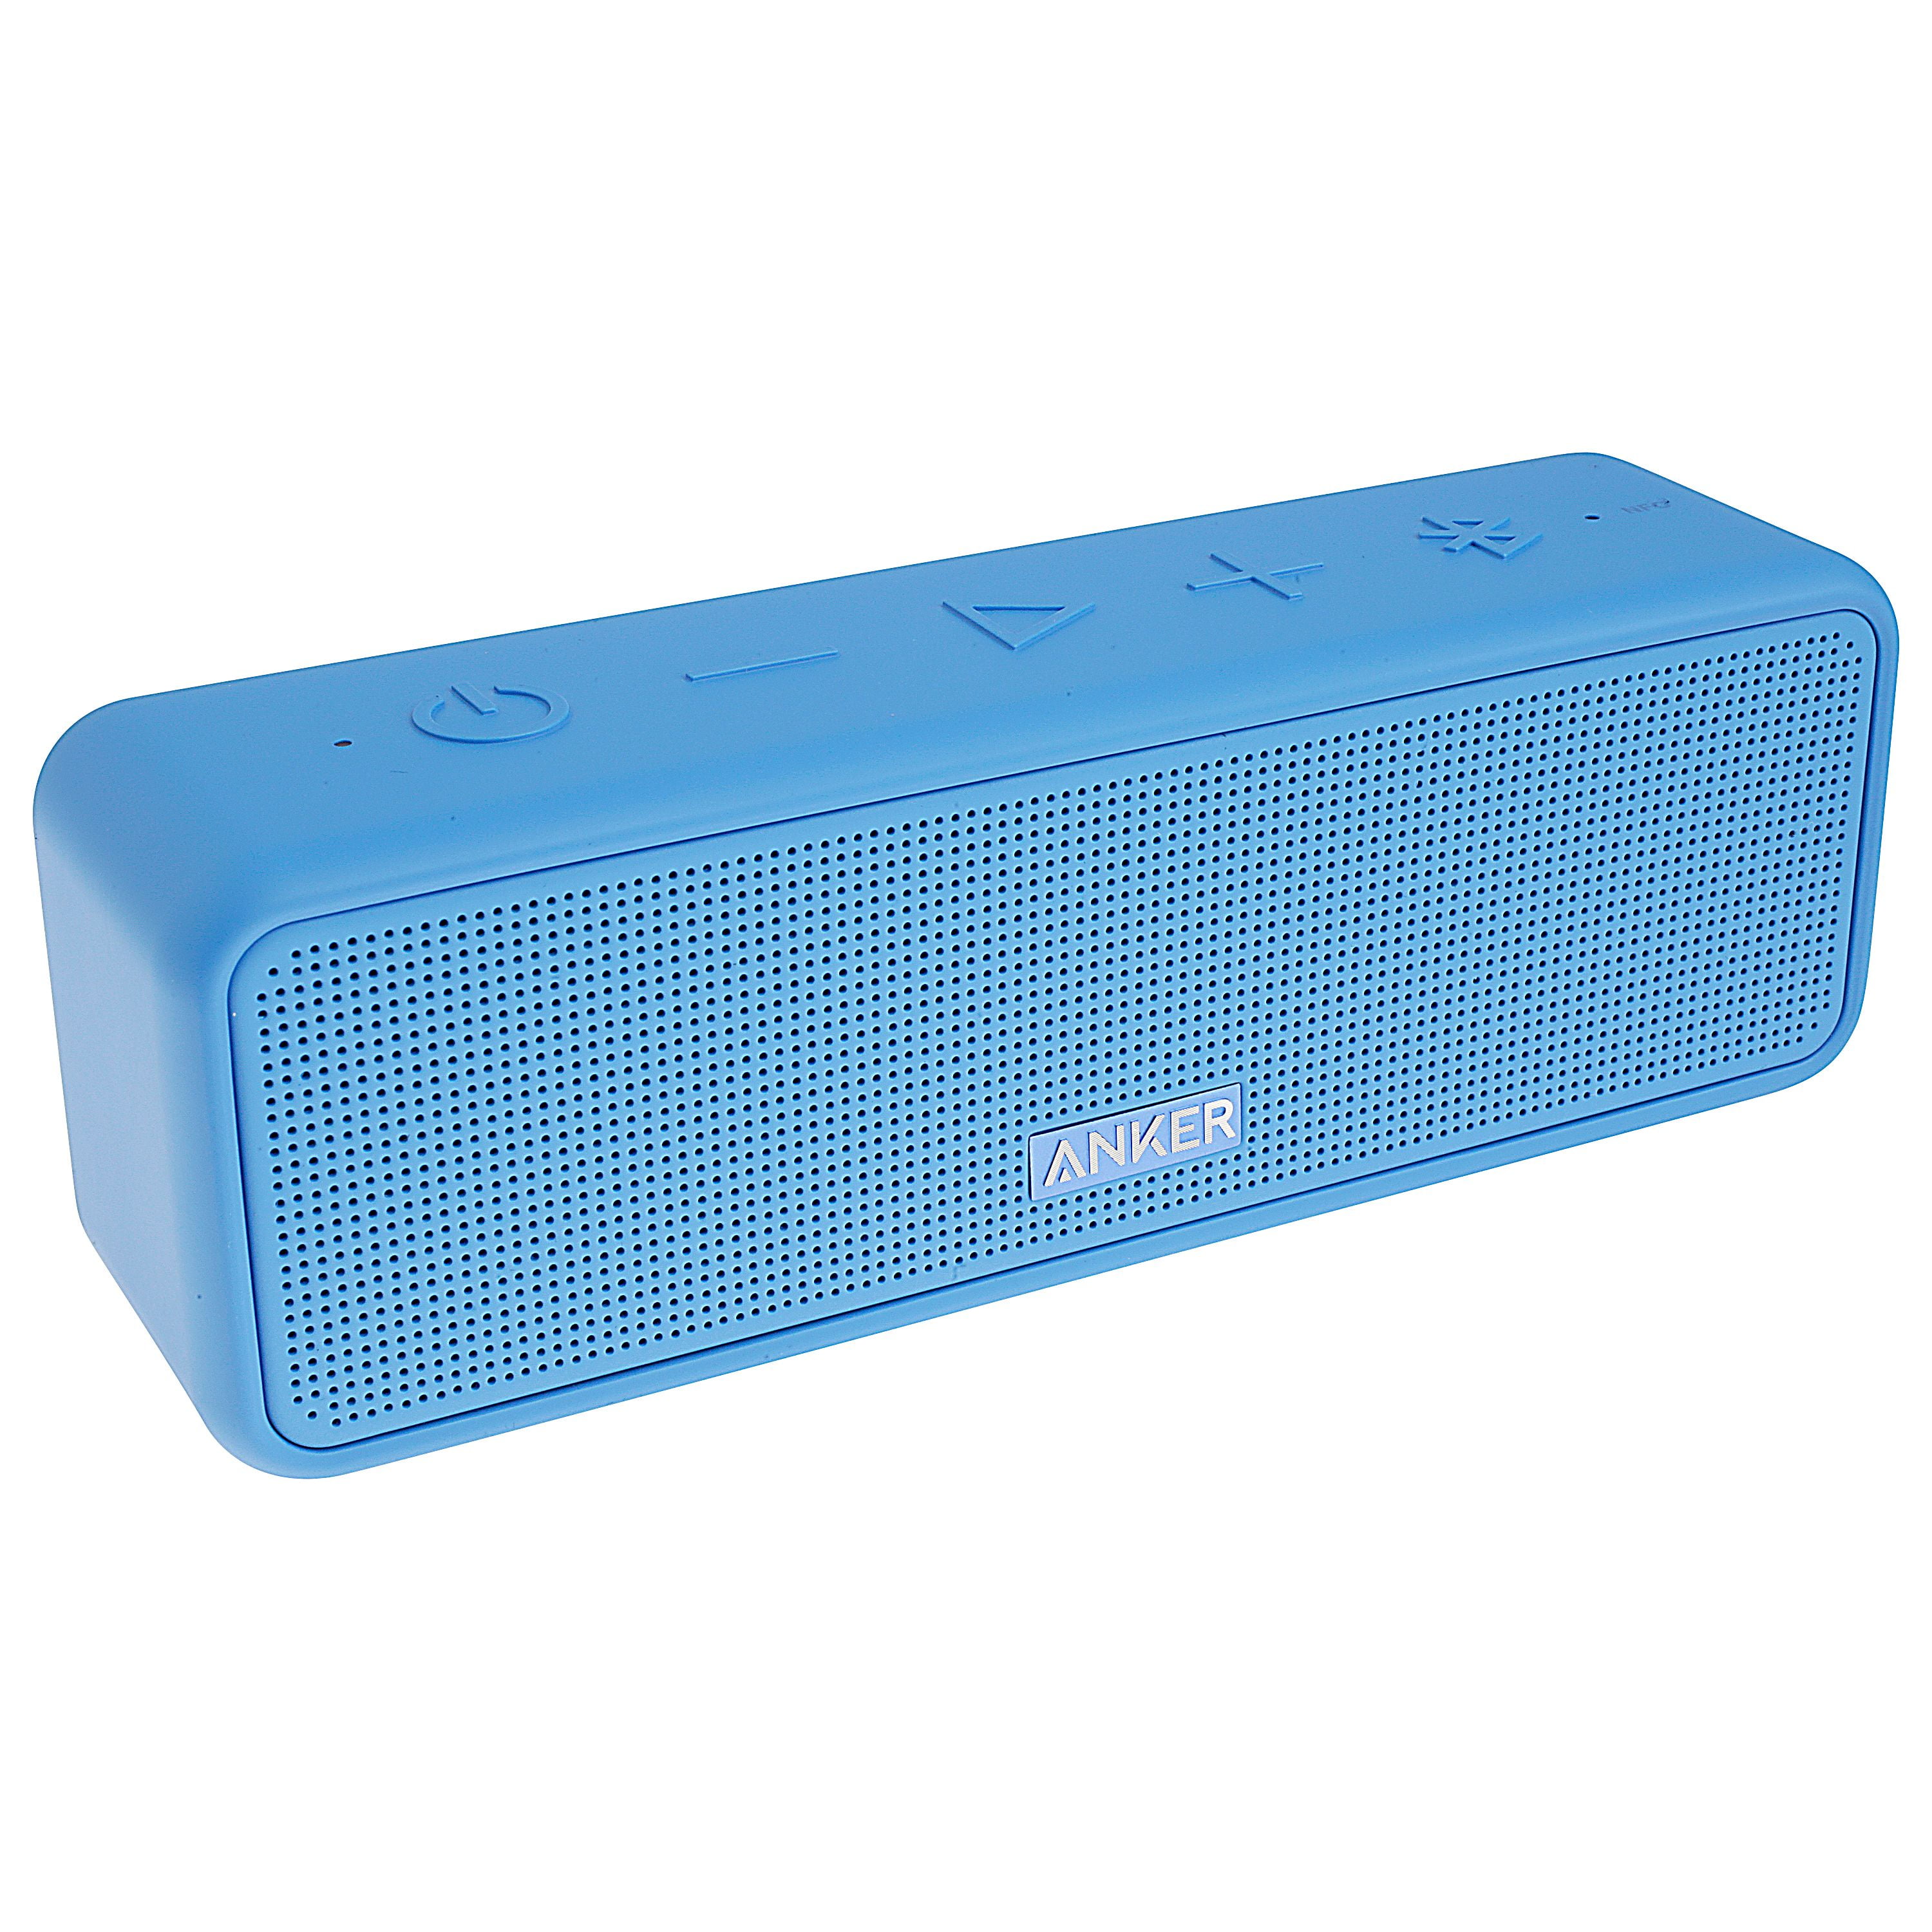 Anker SoundCore Select Portable Bluetooth Speaker Blue with Loud Stereo  Sound, Rich Bass, 24-Hour Playtime, 66 ft Bluetooth Range, Built-In Mic. Perfect  Wireless Speaker for iPhone, Samsung and more